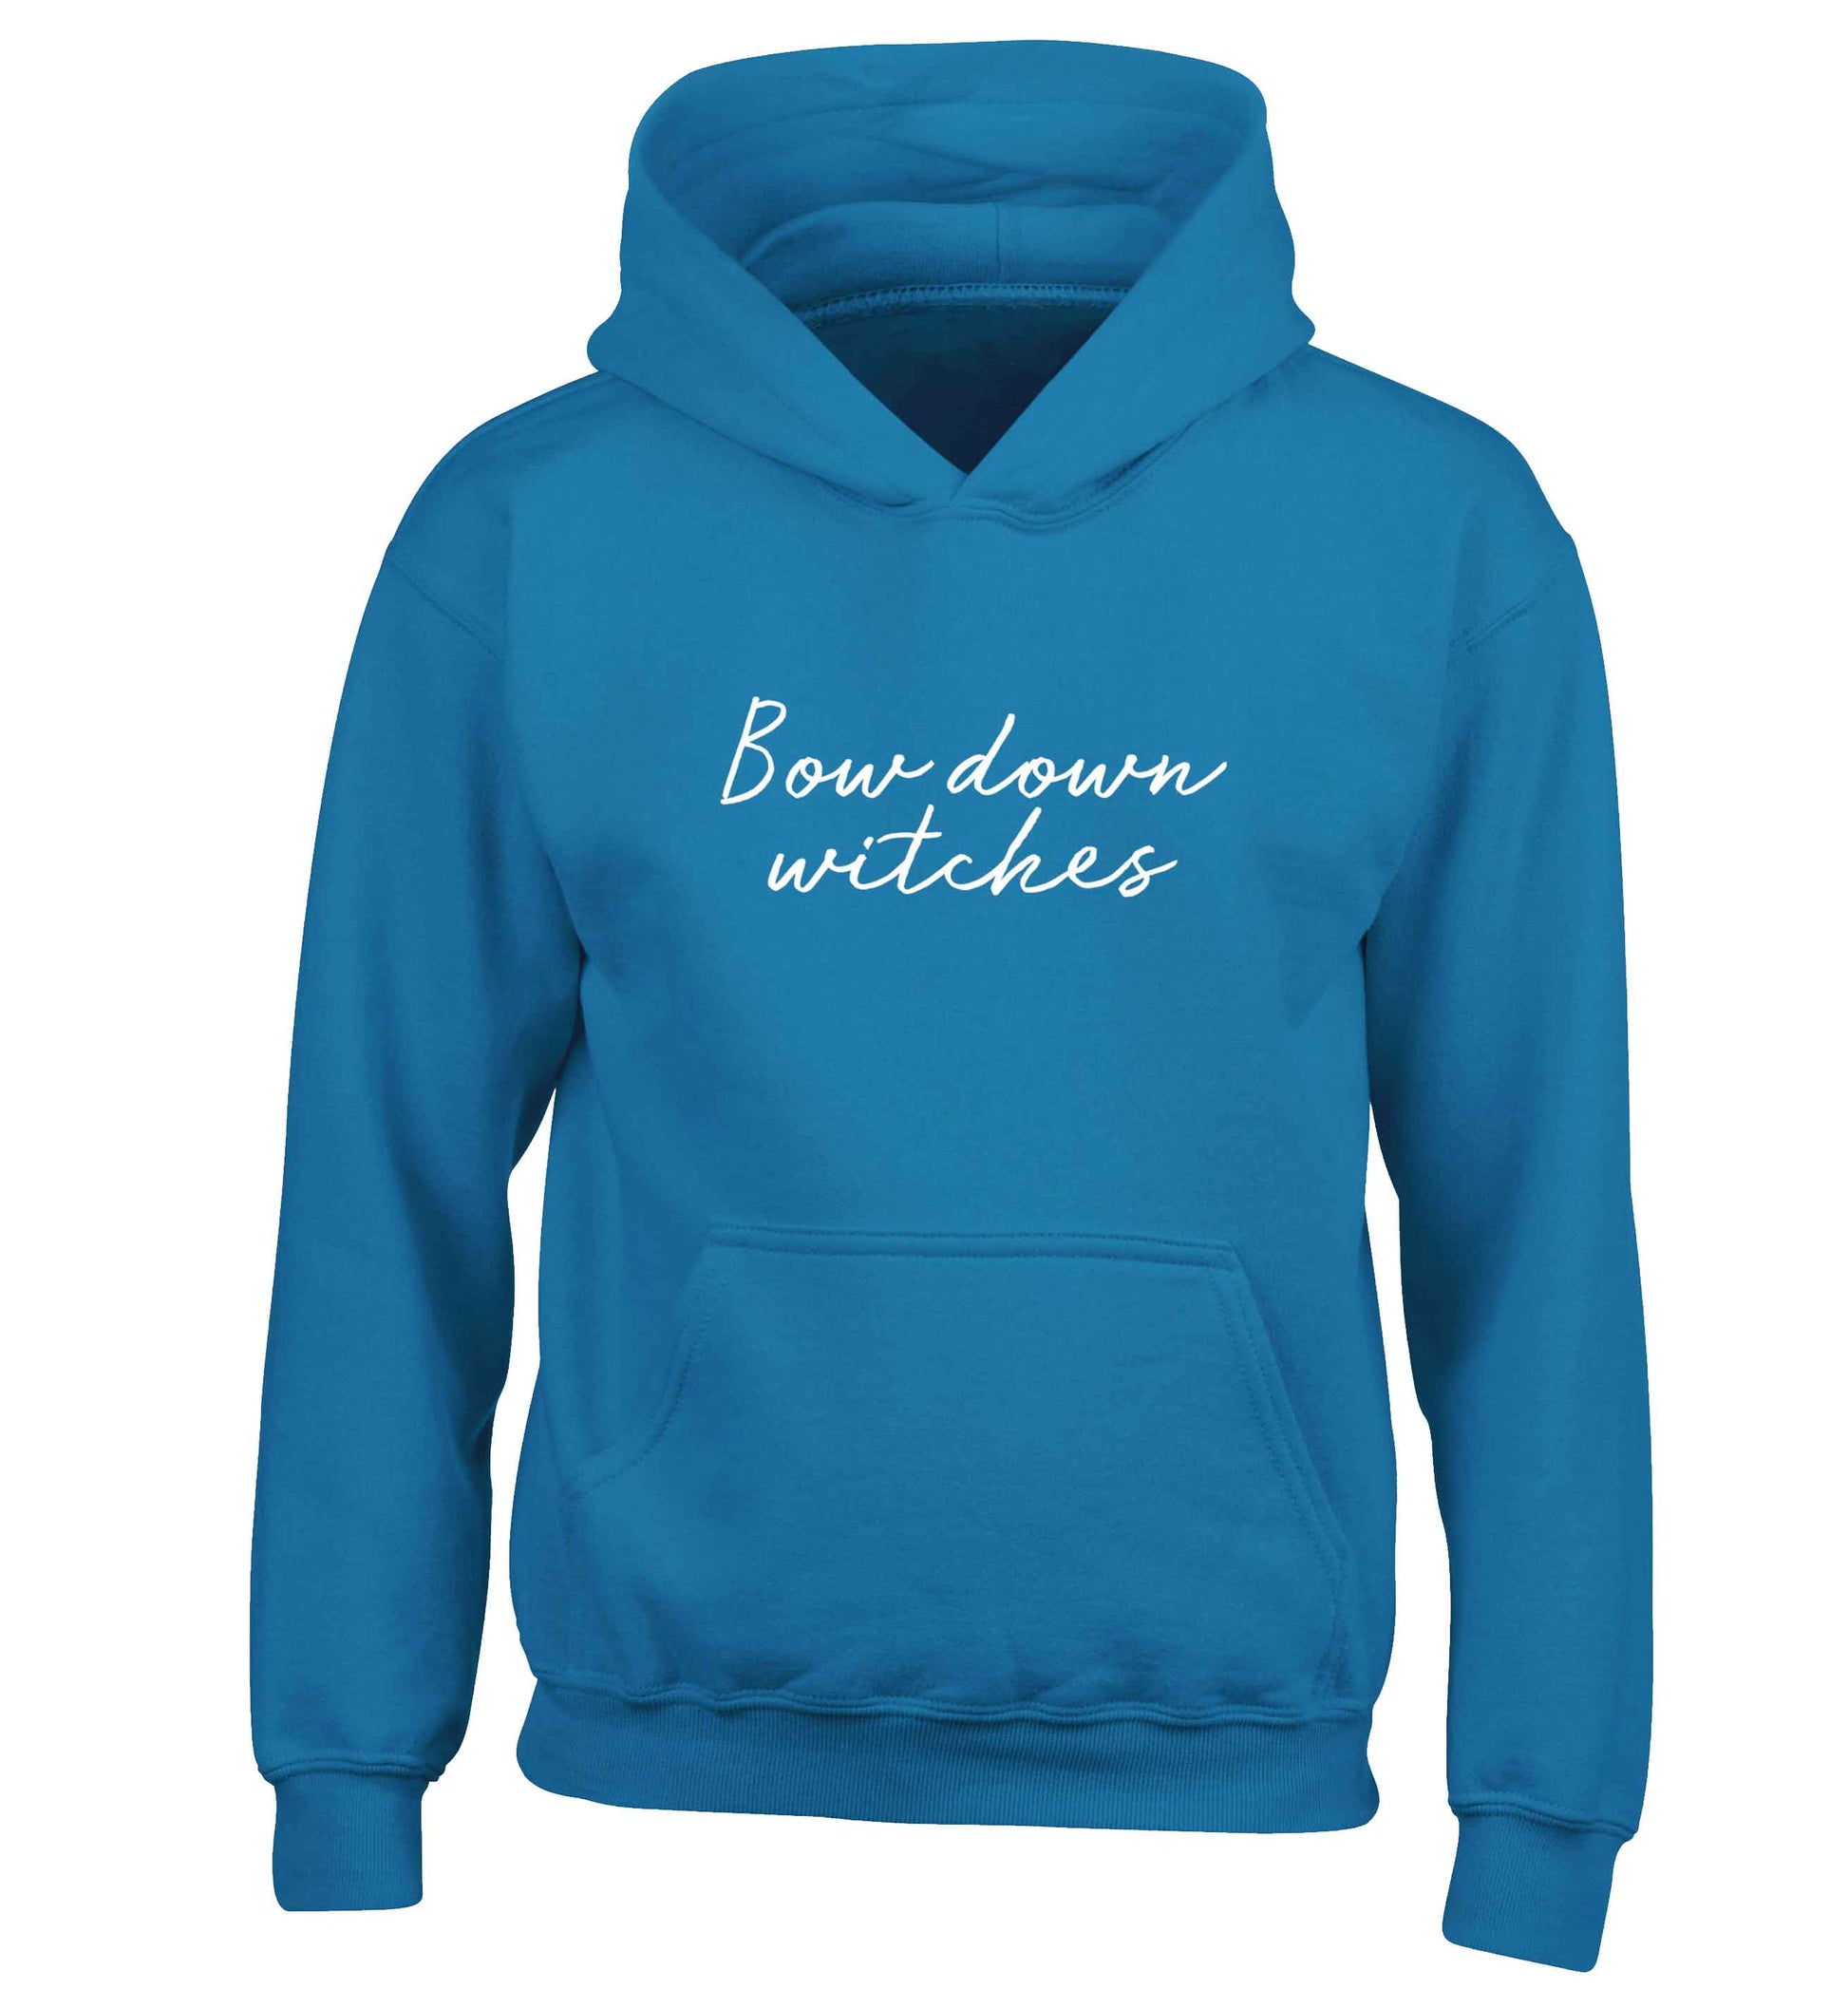 Bow down witches children's blue hoodie 12-13 Years